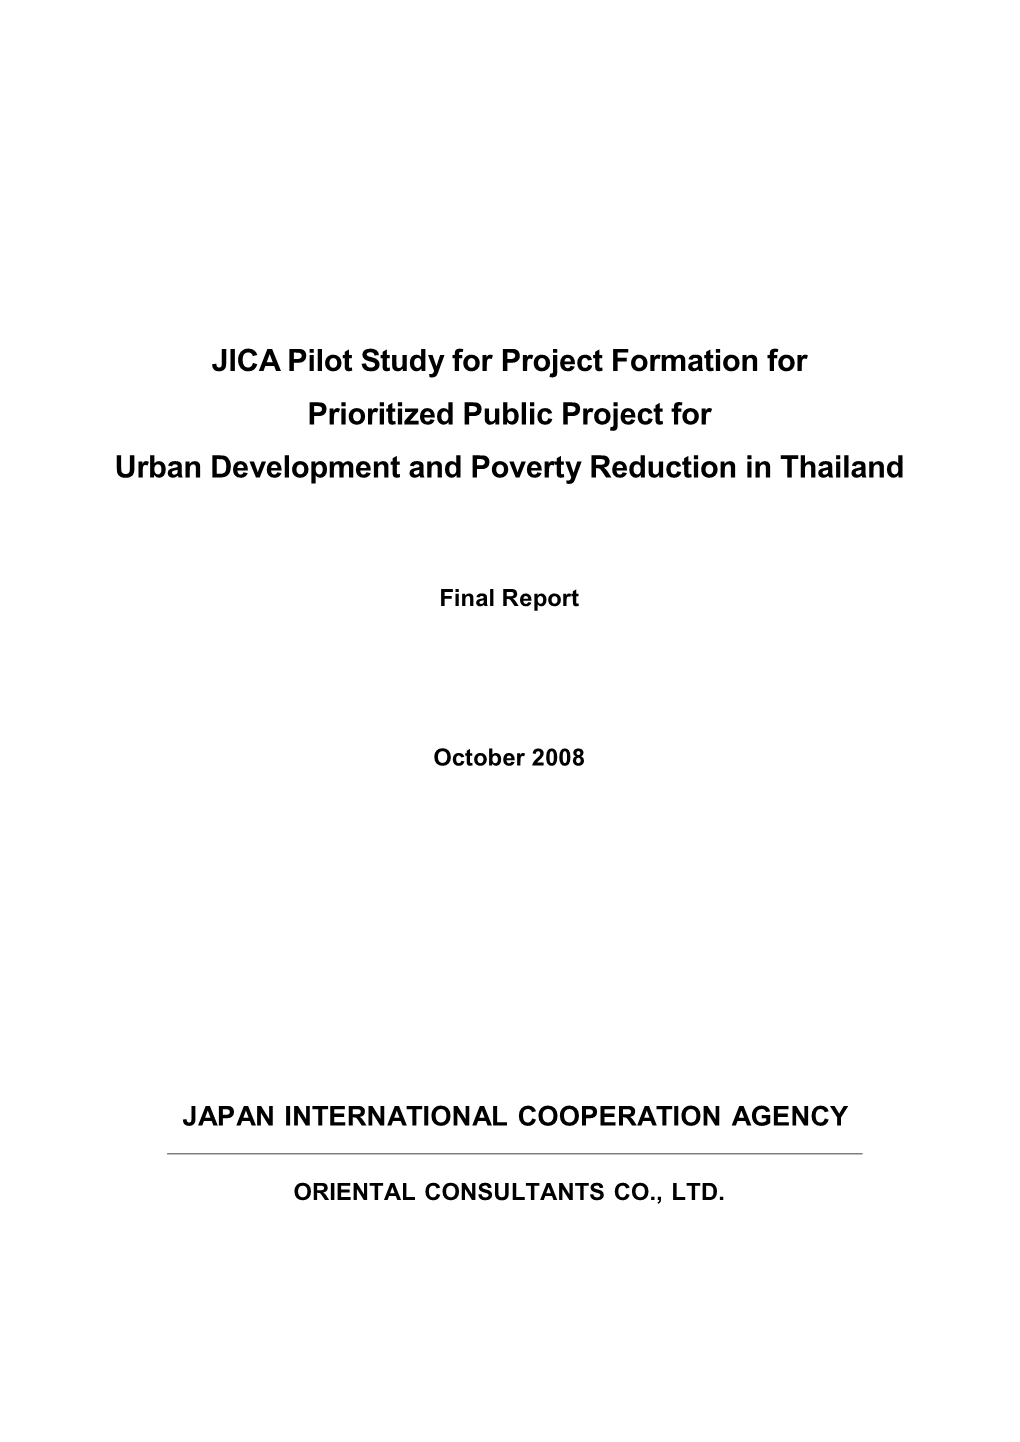 JICA Pilot Study for Project Formation for Prioritized Public Project for Urban Development and Poverty Reduction in Thailand